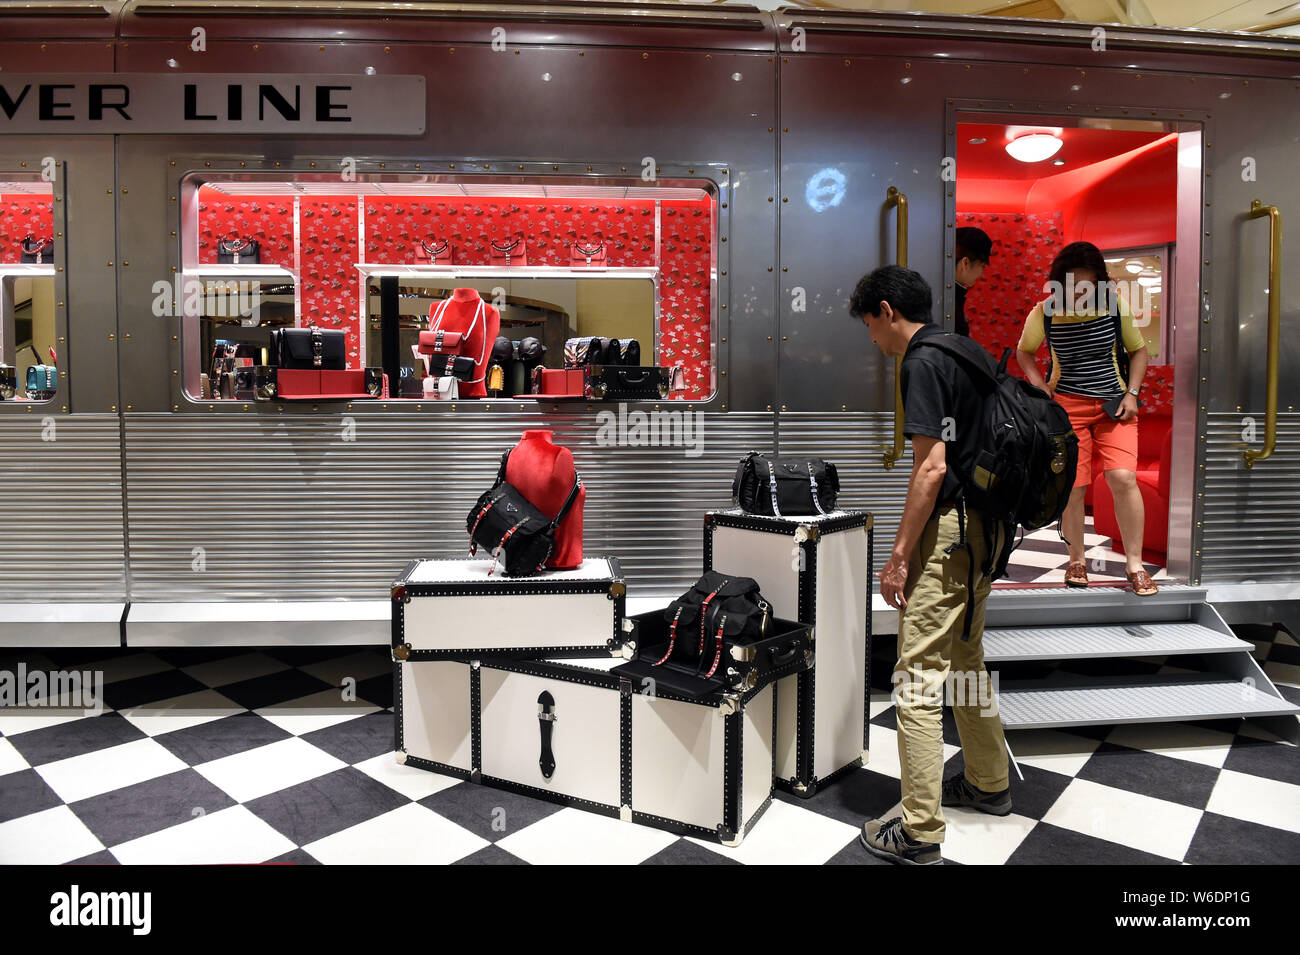 View of the pop-up rail themed Prada boutique, Prada Silver Line, at  Pacific Place in Hong Kong, China, 27 April 2018. Adopting a rail theme,  Prad Stock Photo - Alamy